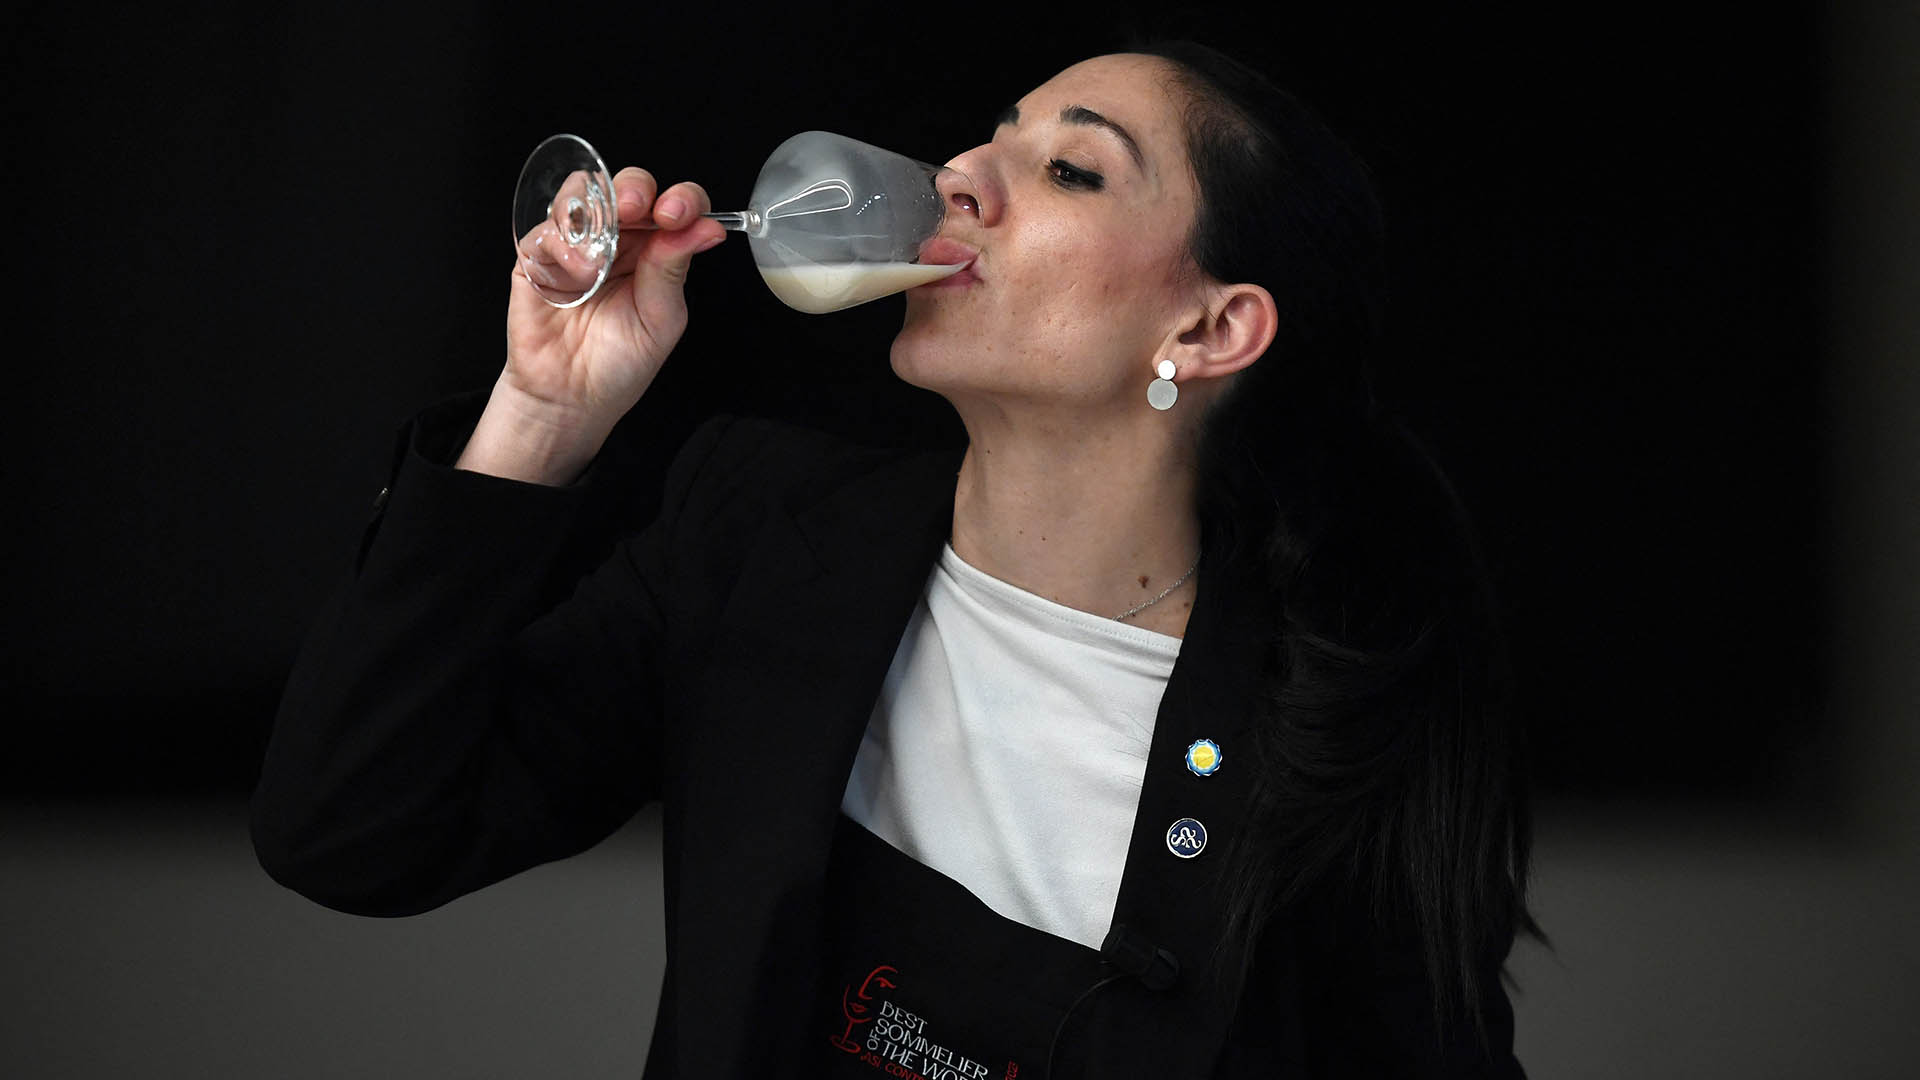 Candidate Valeria Gamper of Argentina takes part in a cocktail-tasting trial as part of the Best Sommelier in the World 2023 contest at a hotel in Paris on February 10, 2023. (Photo by Christophe ARCHAMBAULT / AFP)